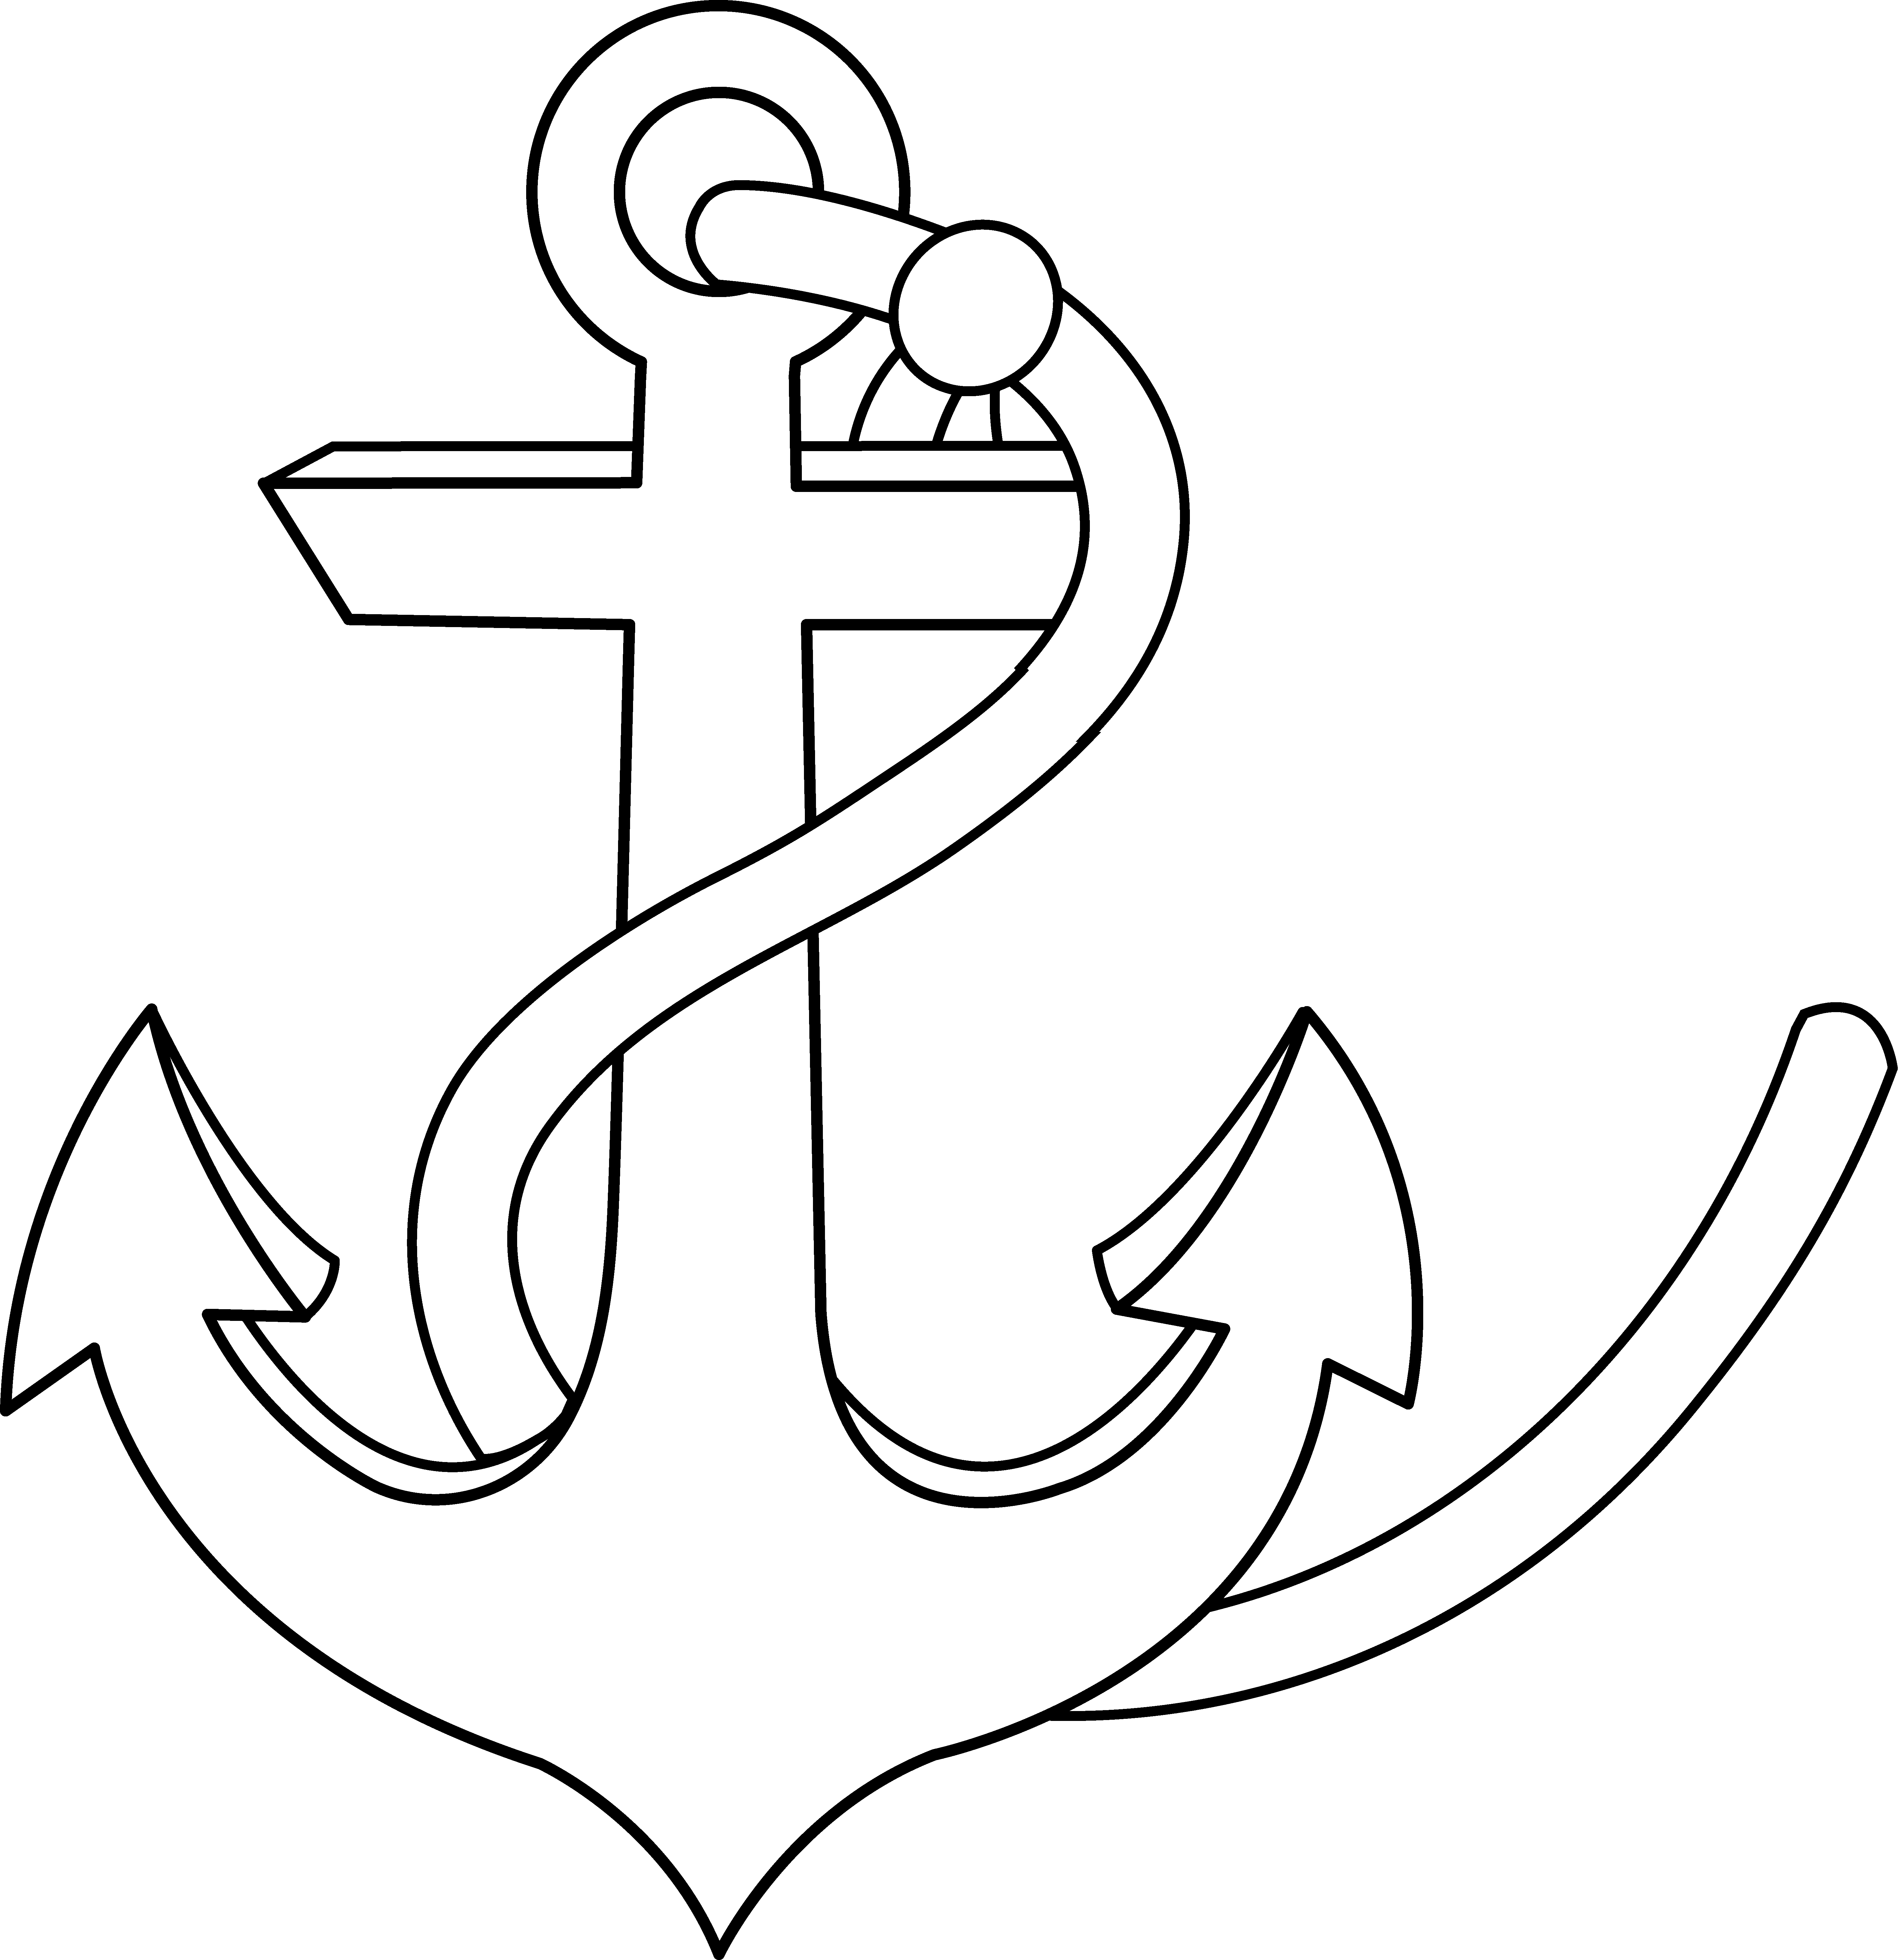 anchor black and white